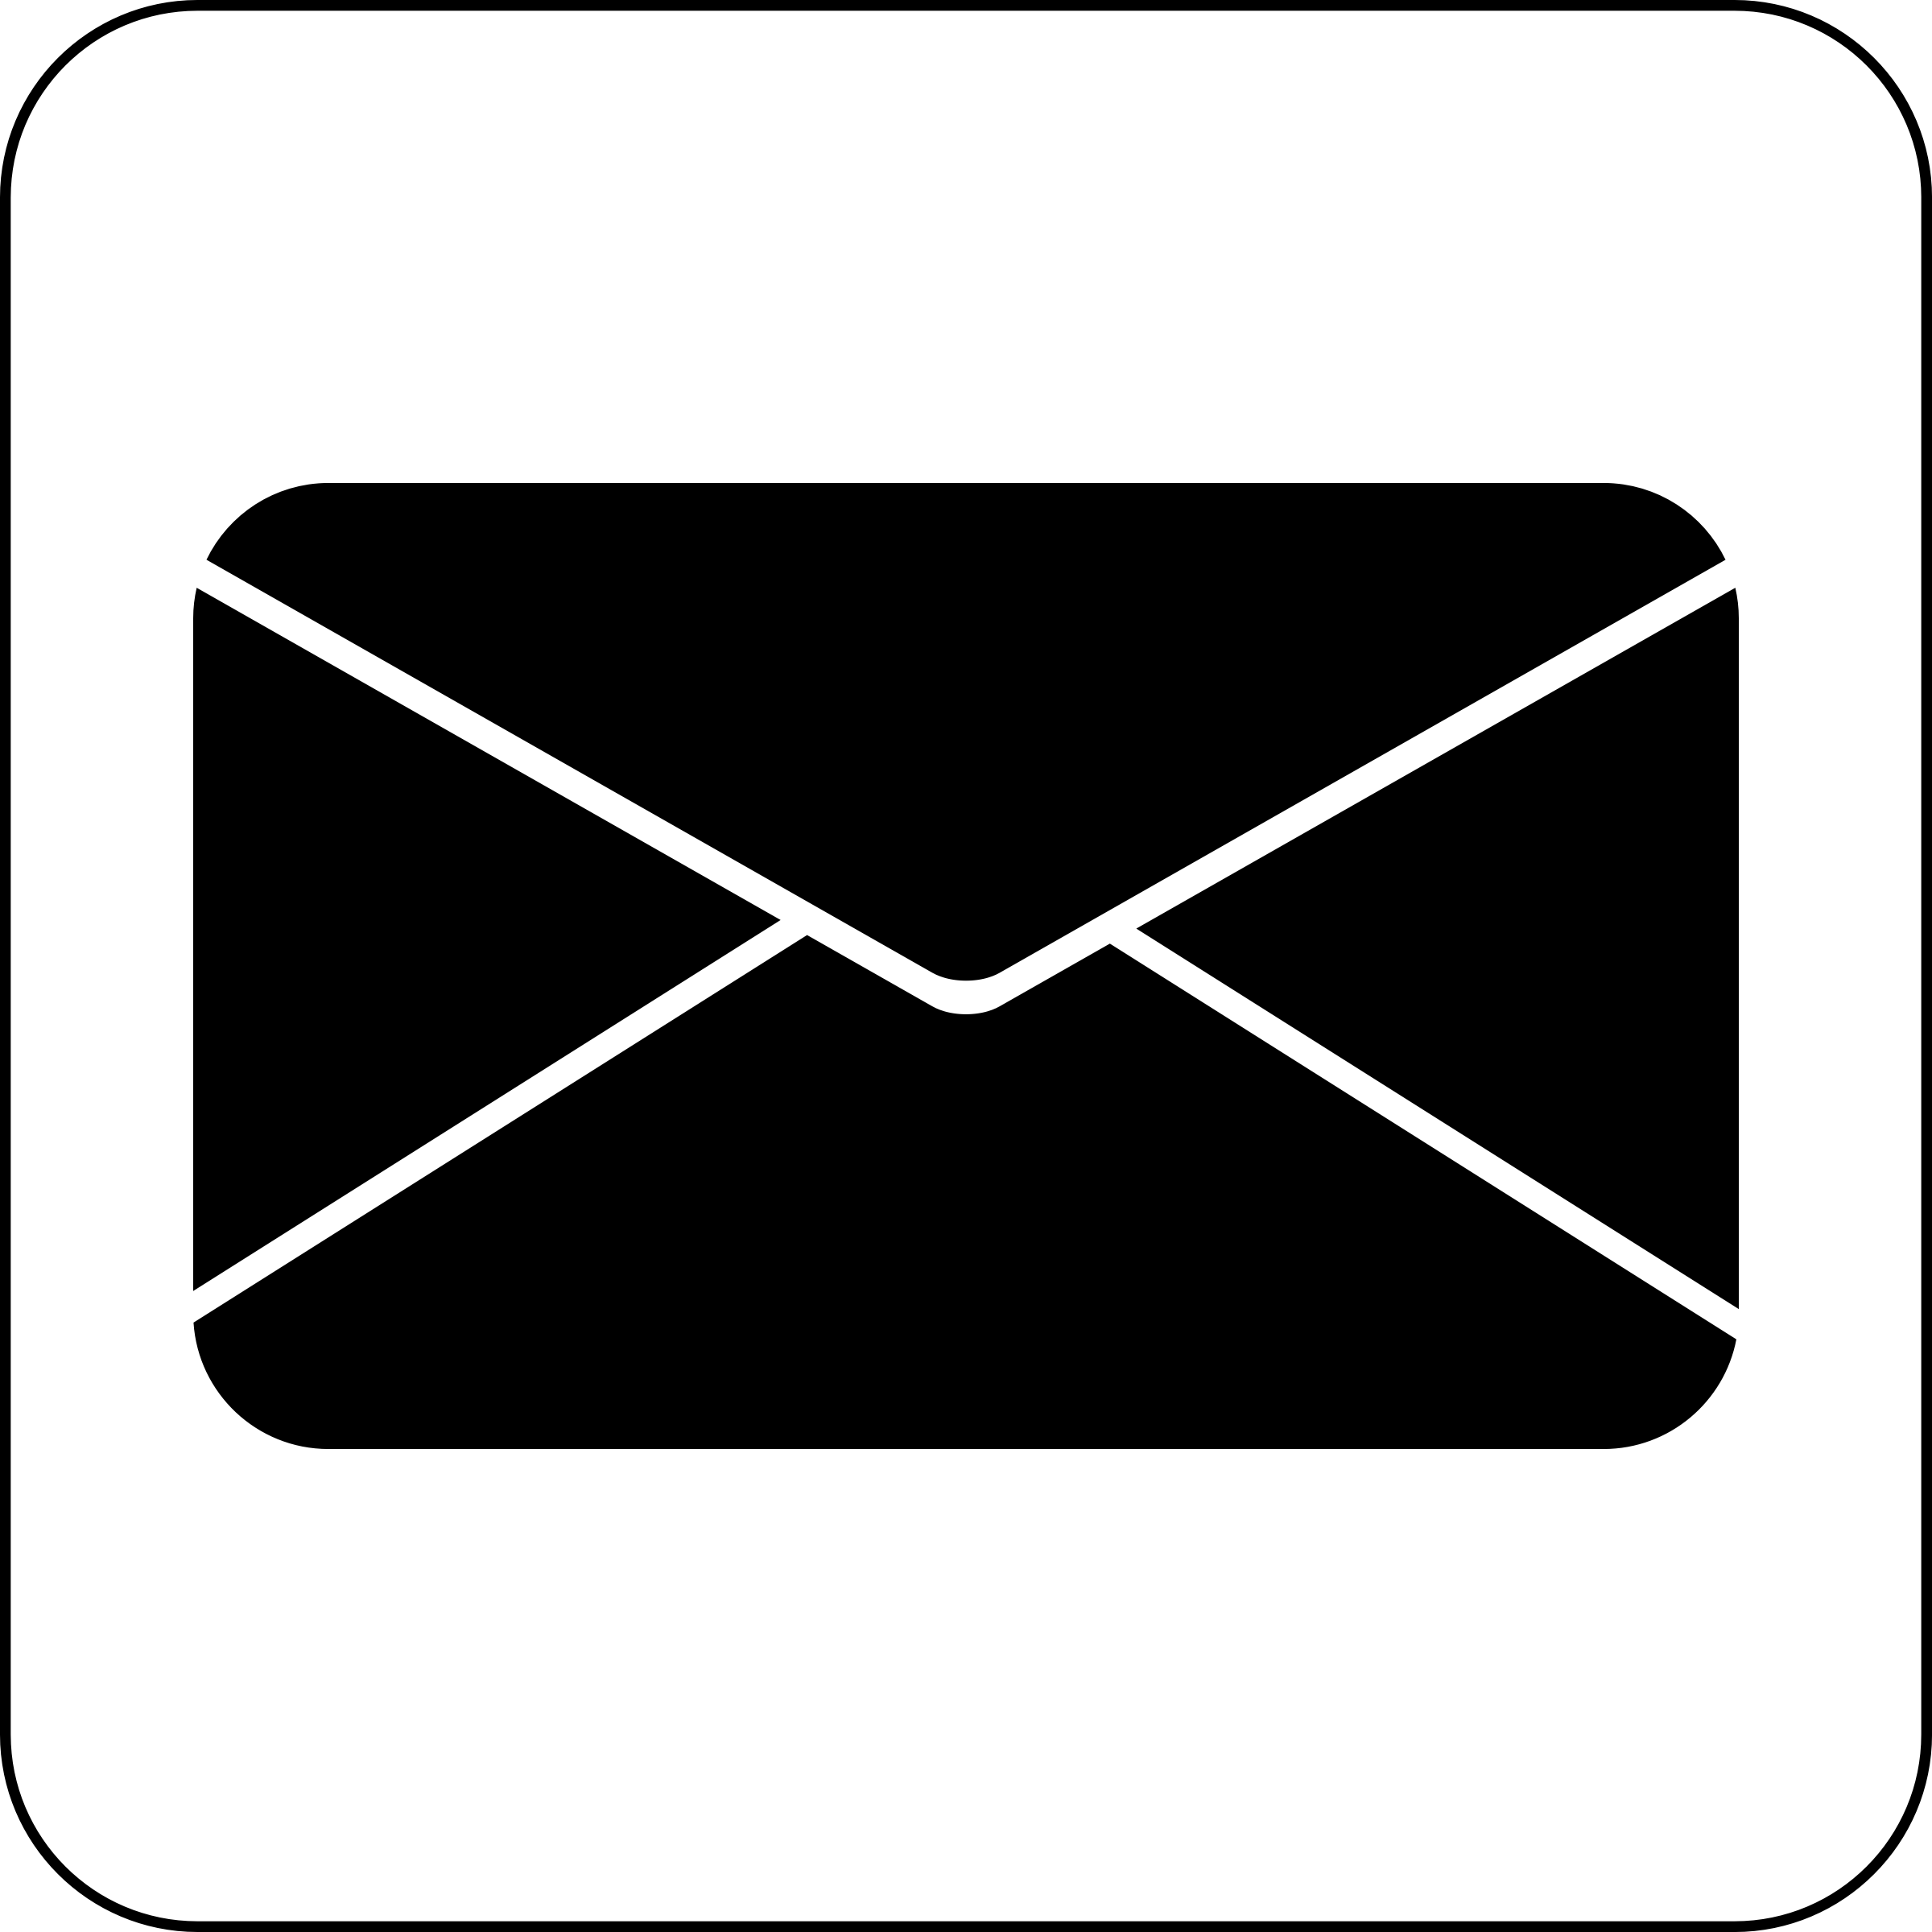 Email symbol clipart